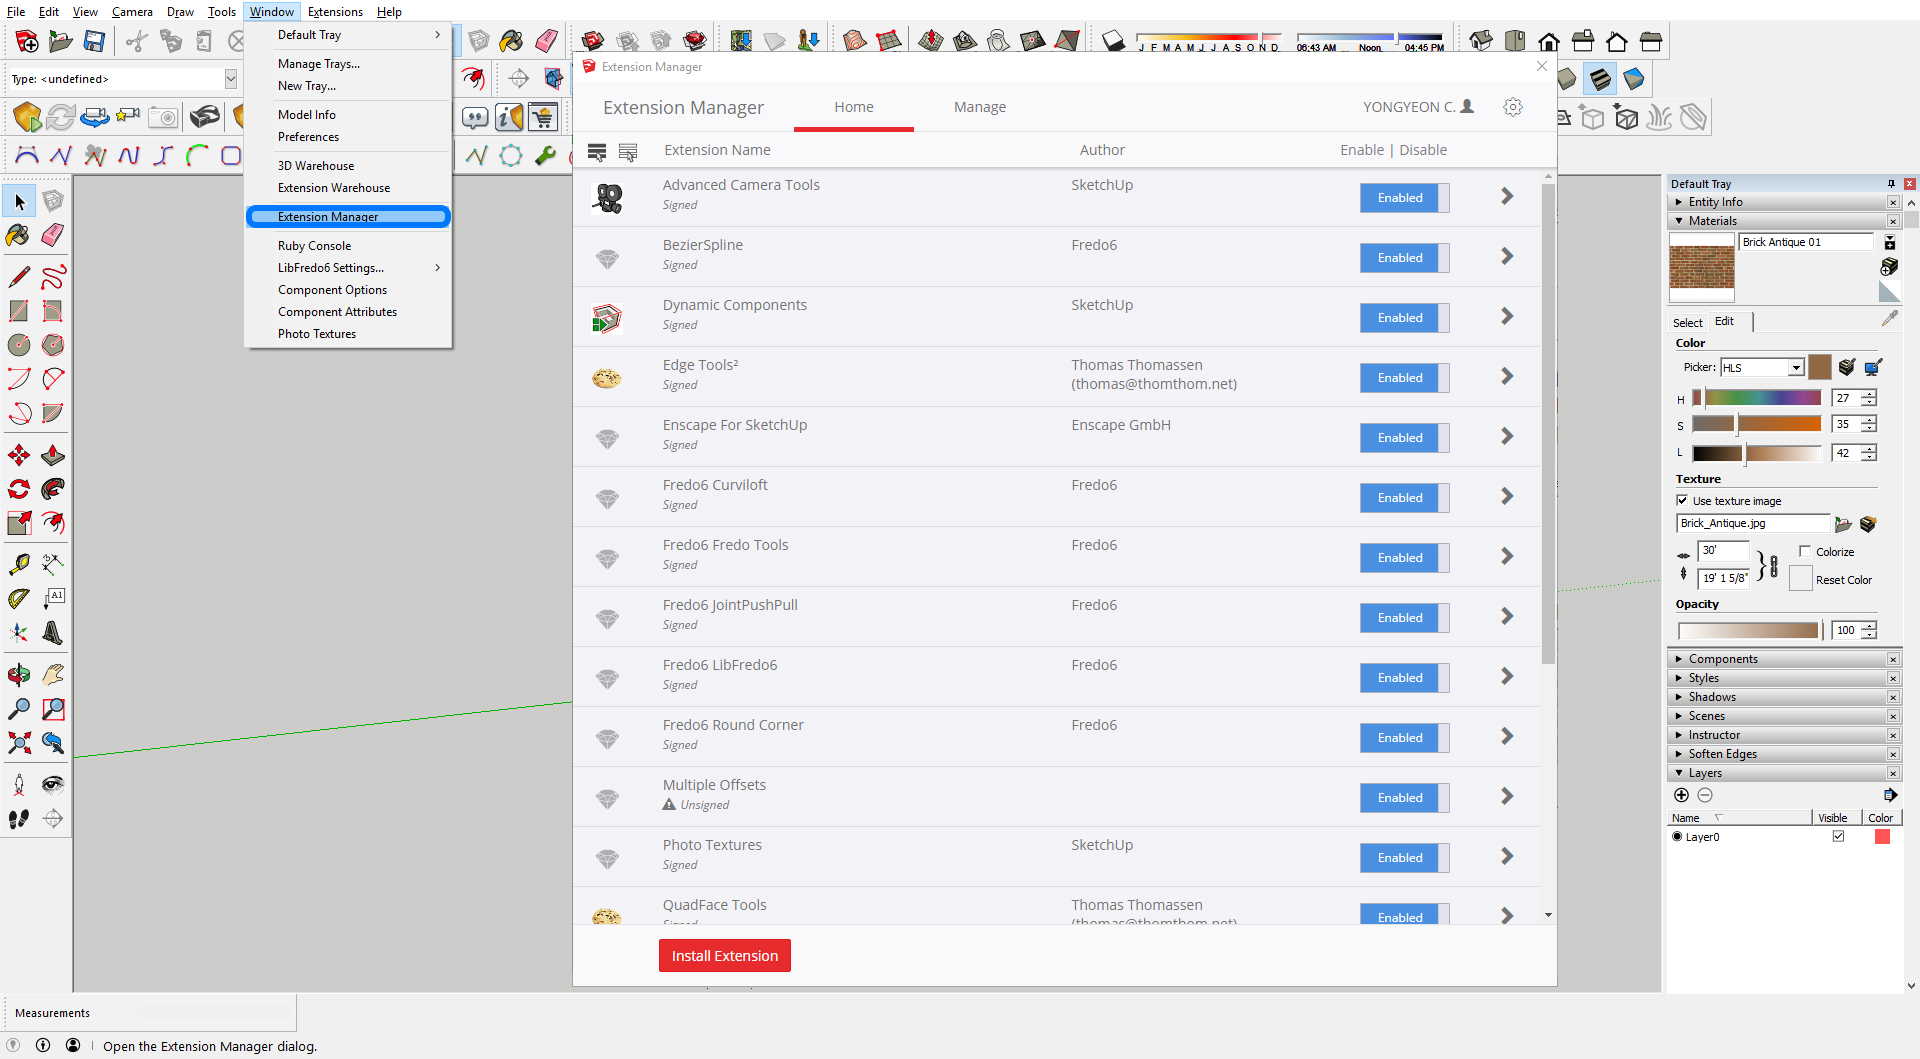 It shows the extension manager in the application.